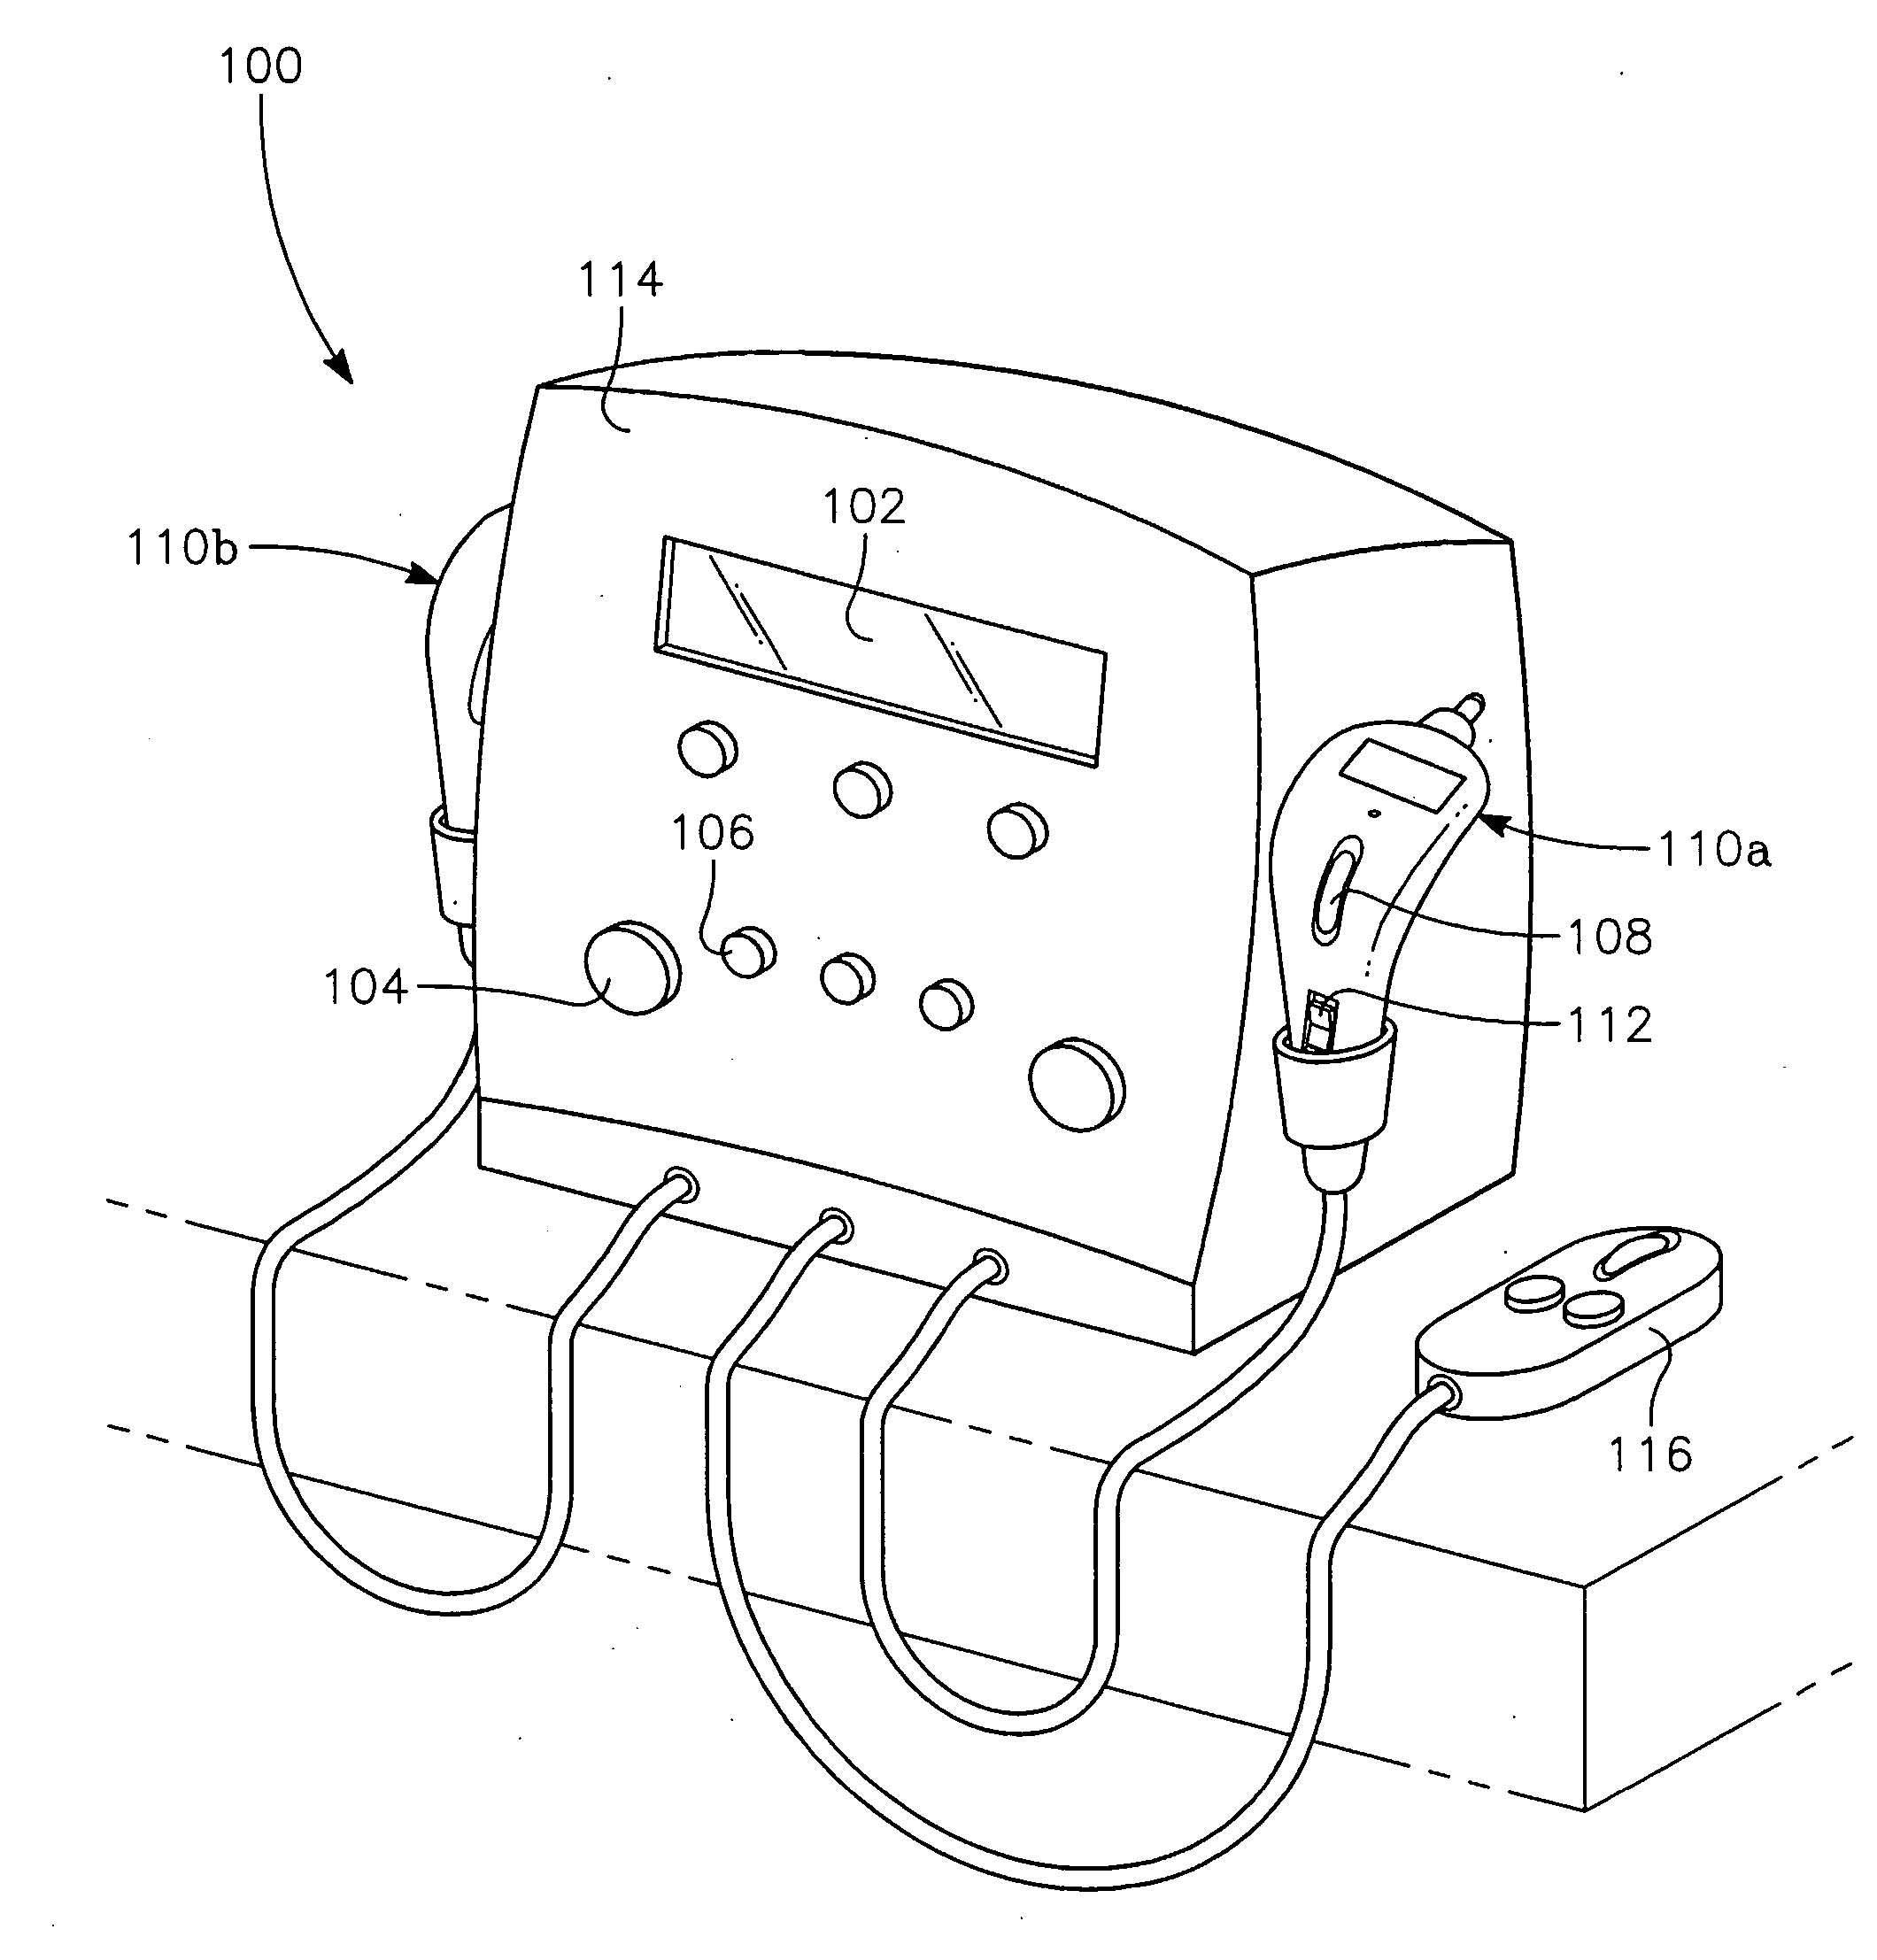 Device and method for the treatment of pain with electrical energy